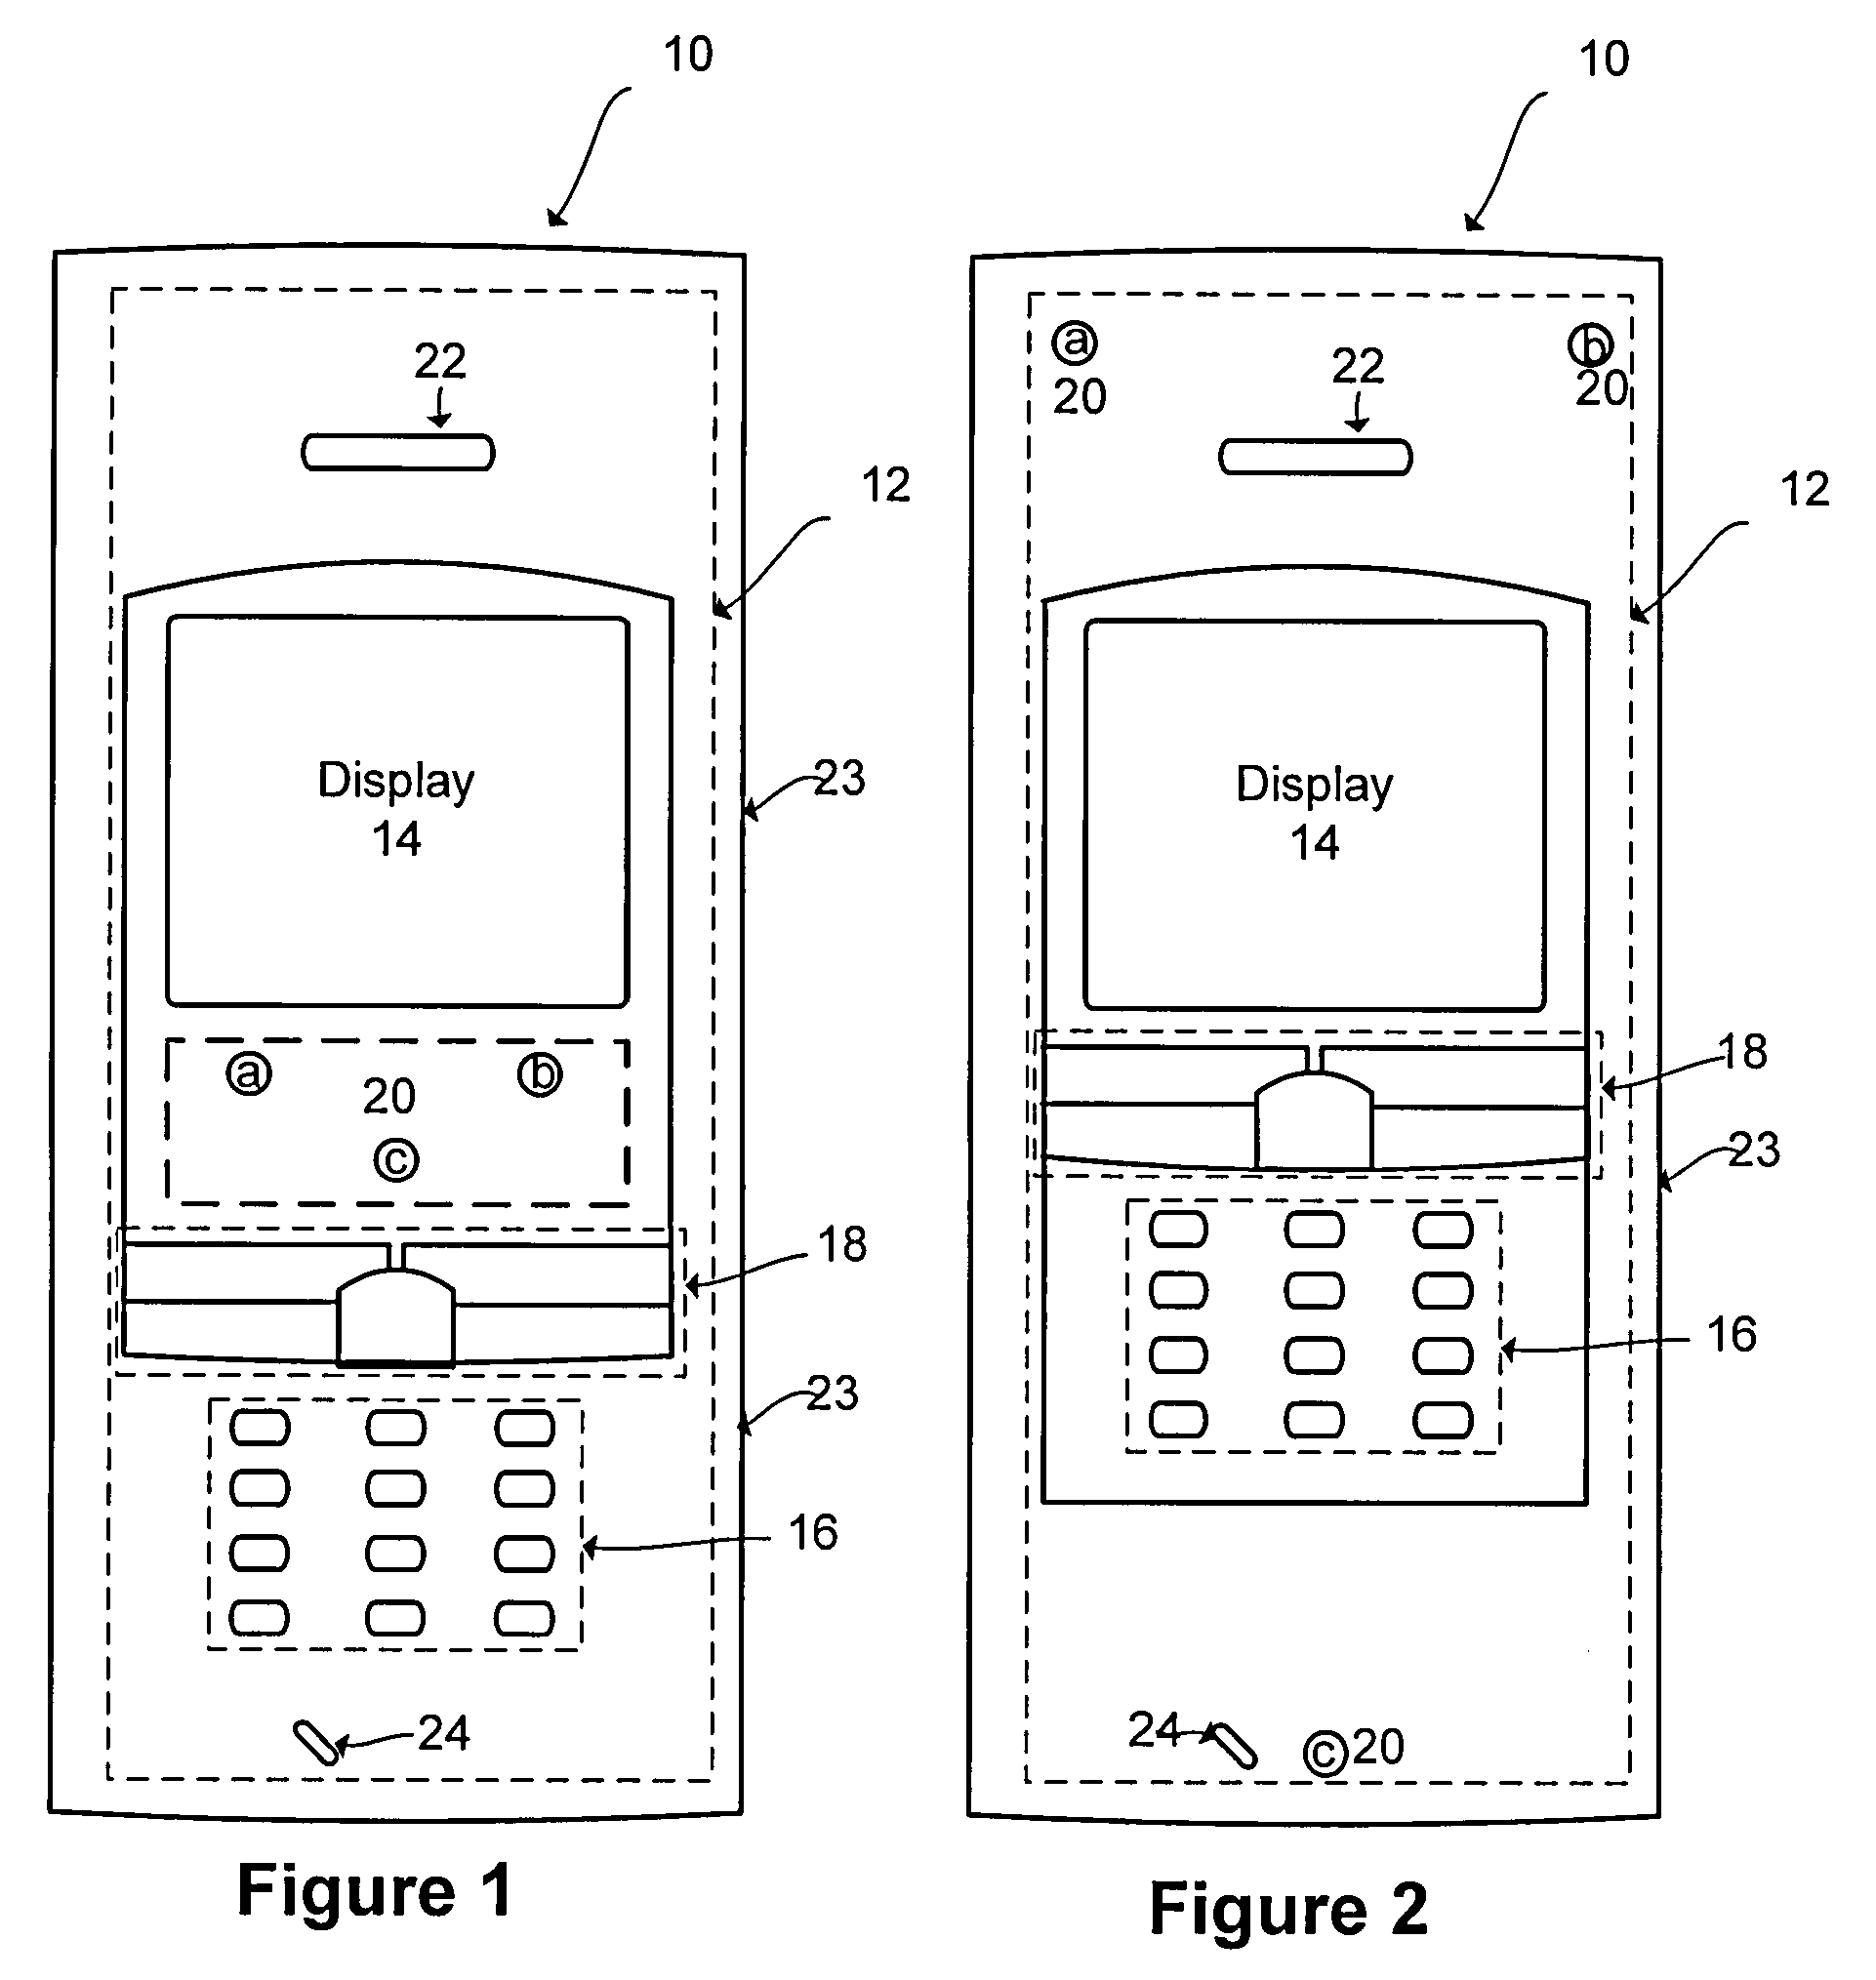 Method and system for detecting movement of an object